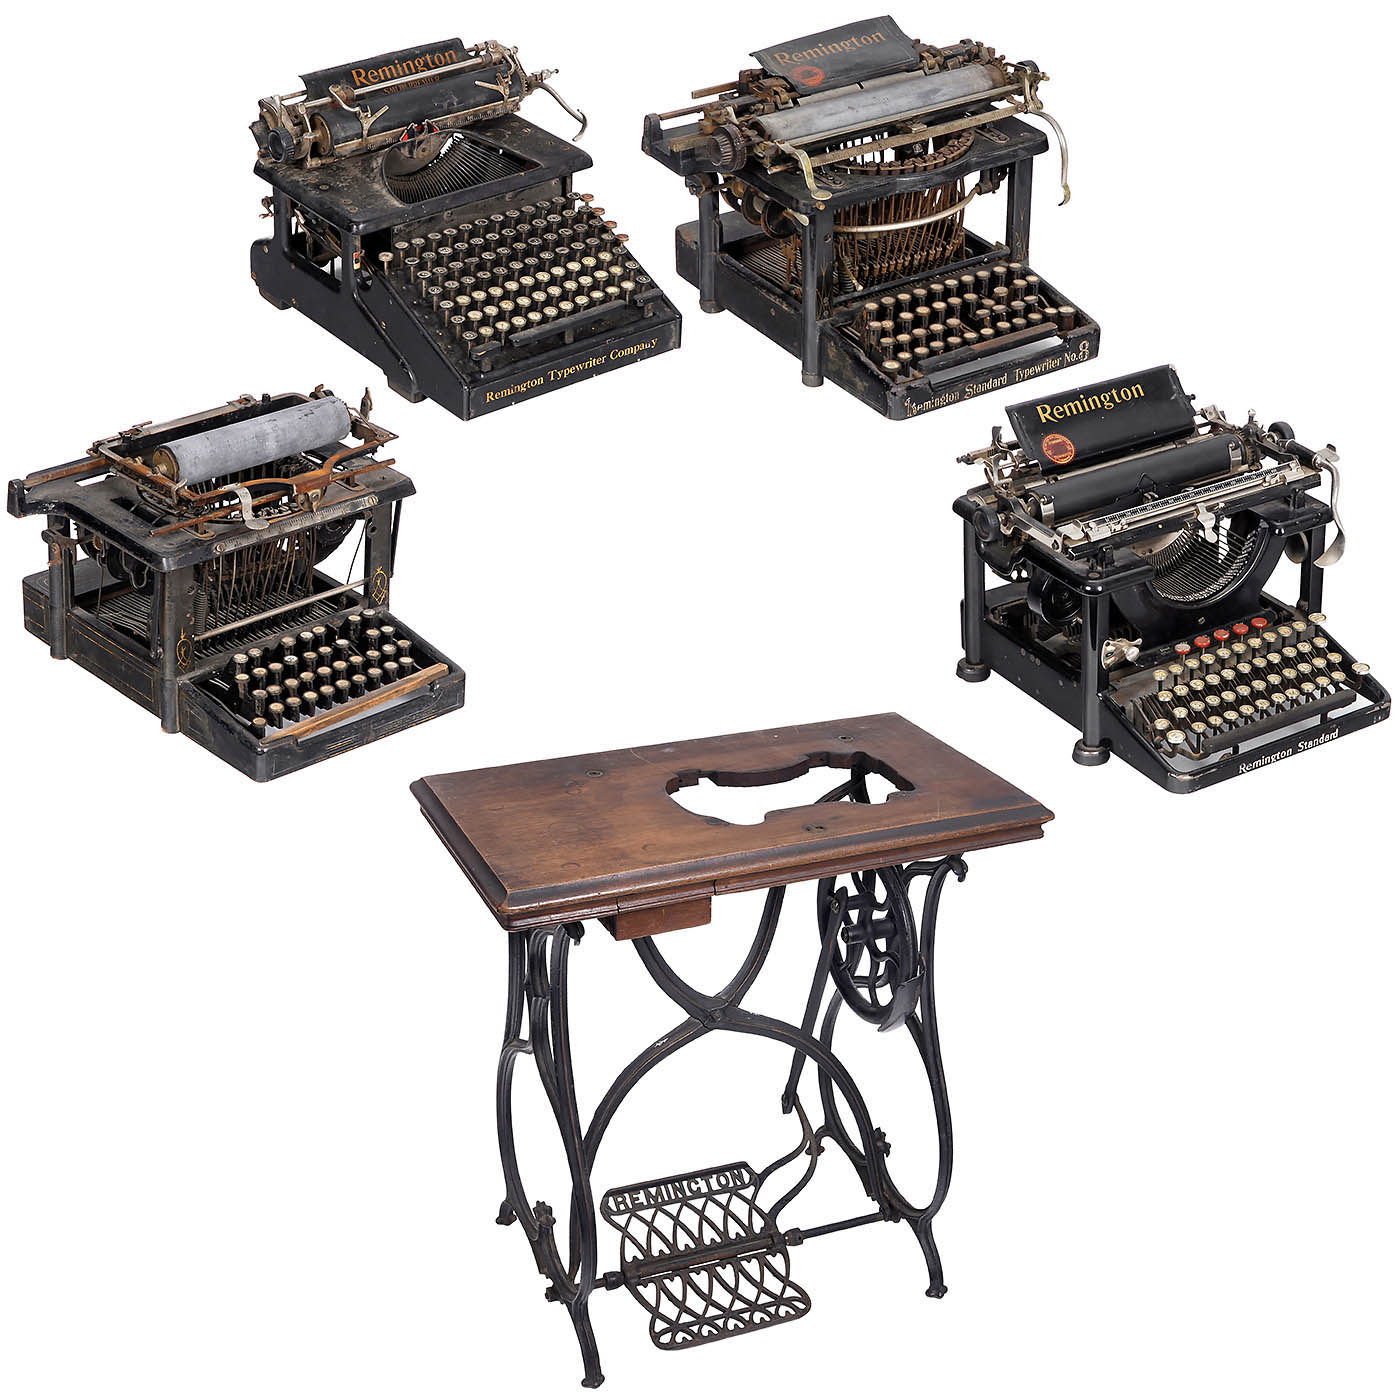 4 Remington Typewriters and 1 Table - Image 2 of 7